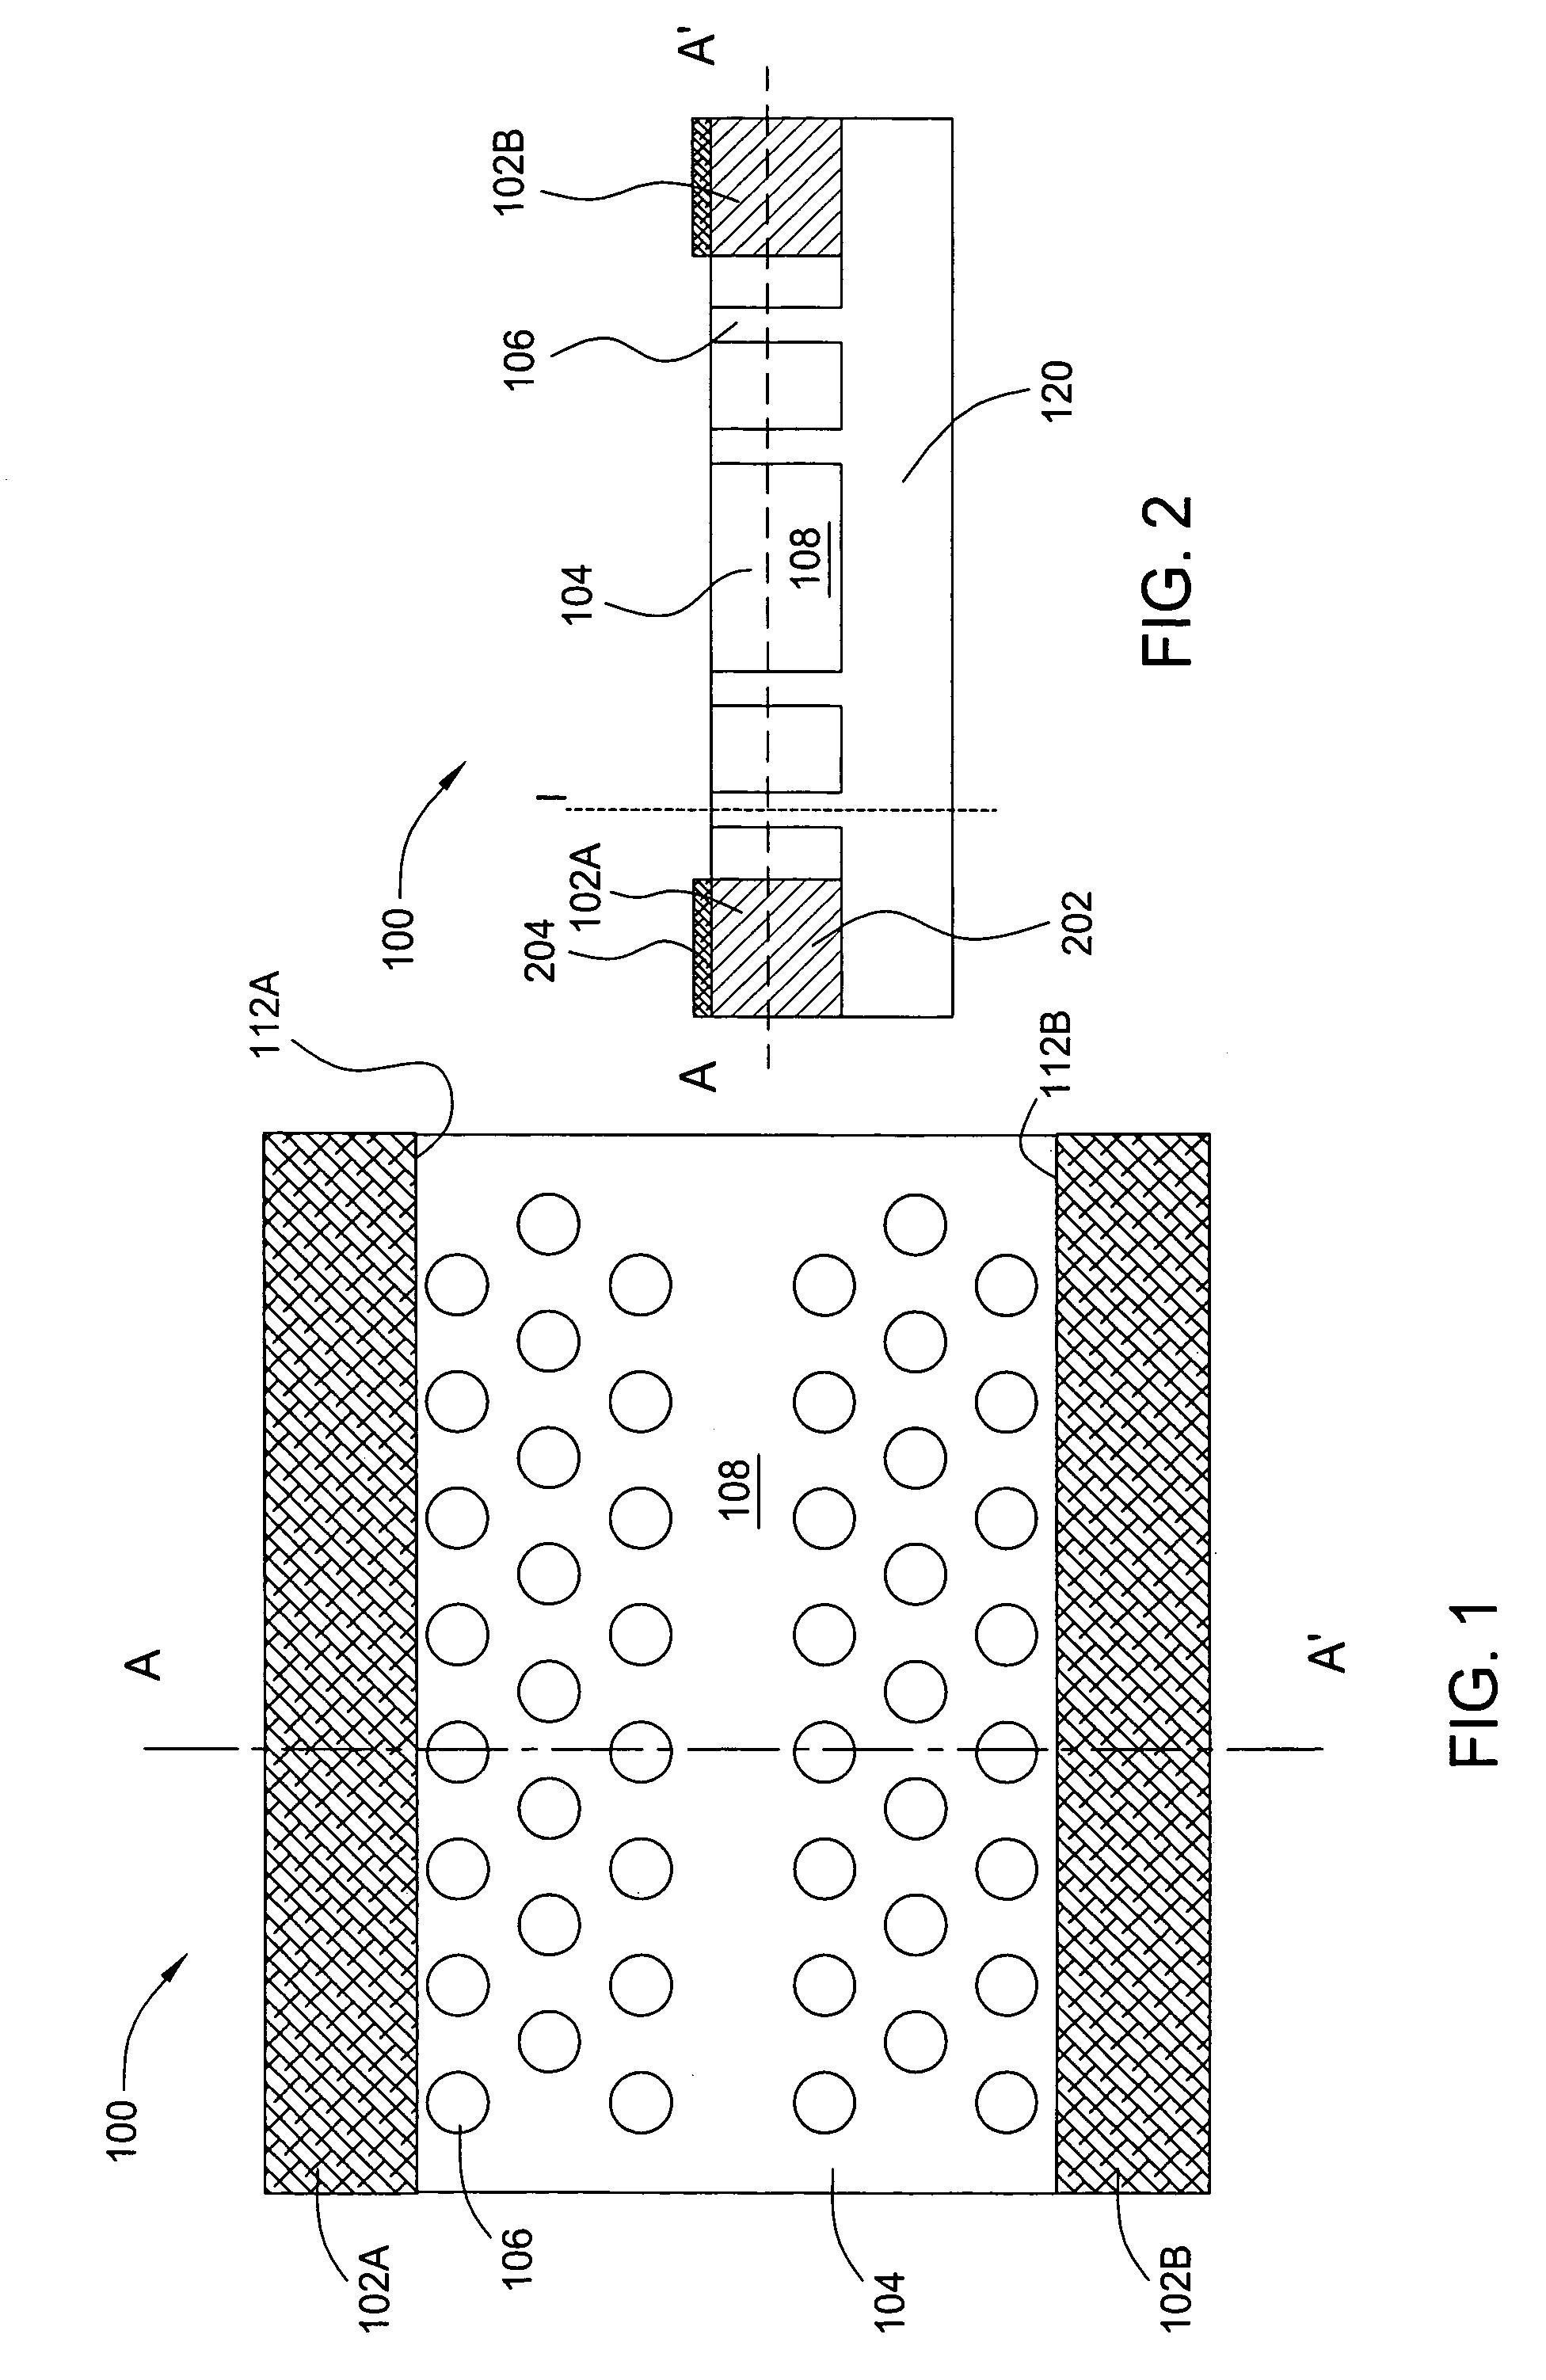 Method and apparatus for thermo-optic modulation of optical signals